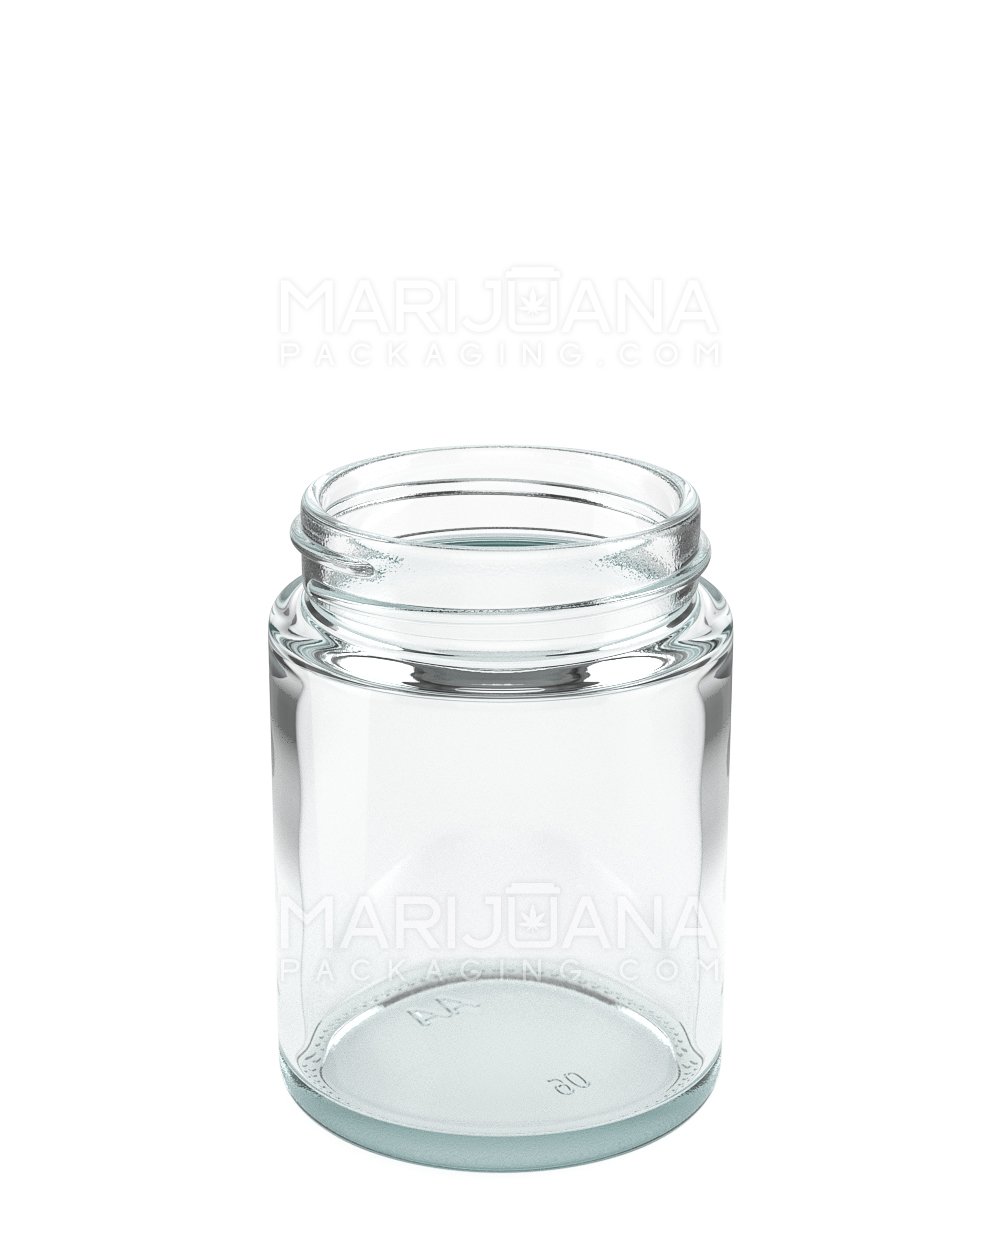 Straight Sided Clear Glass Jars with Black Cap | 53mm - 4oz - 120 Count - 3